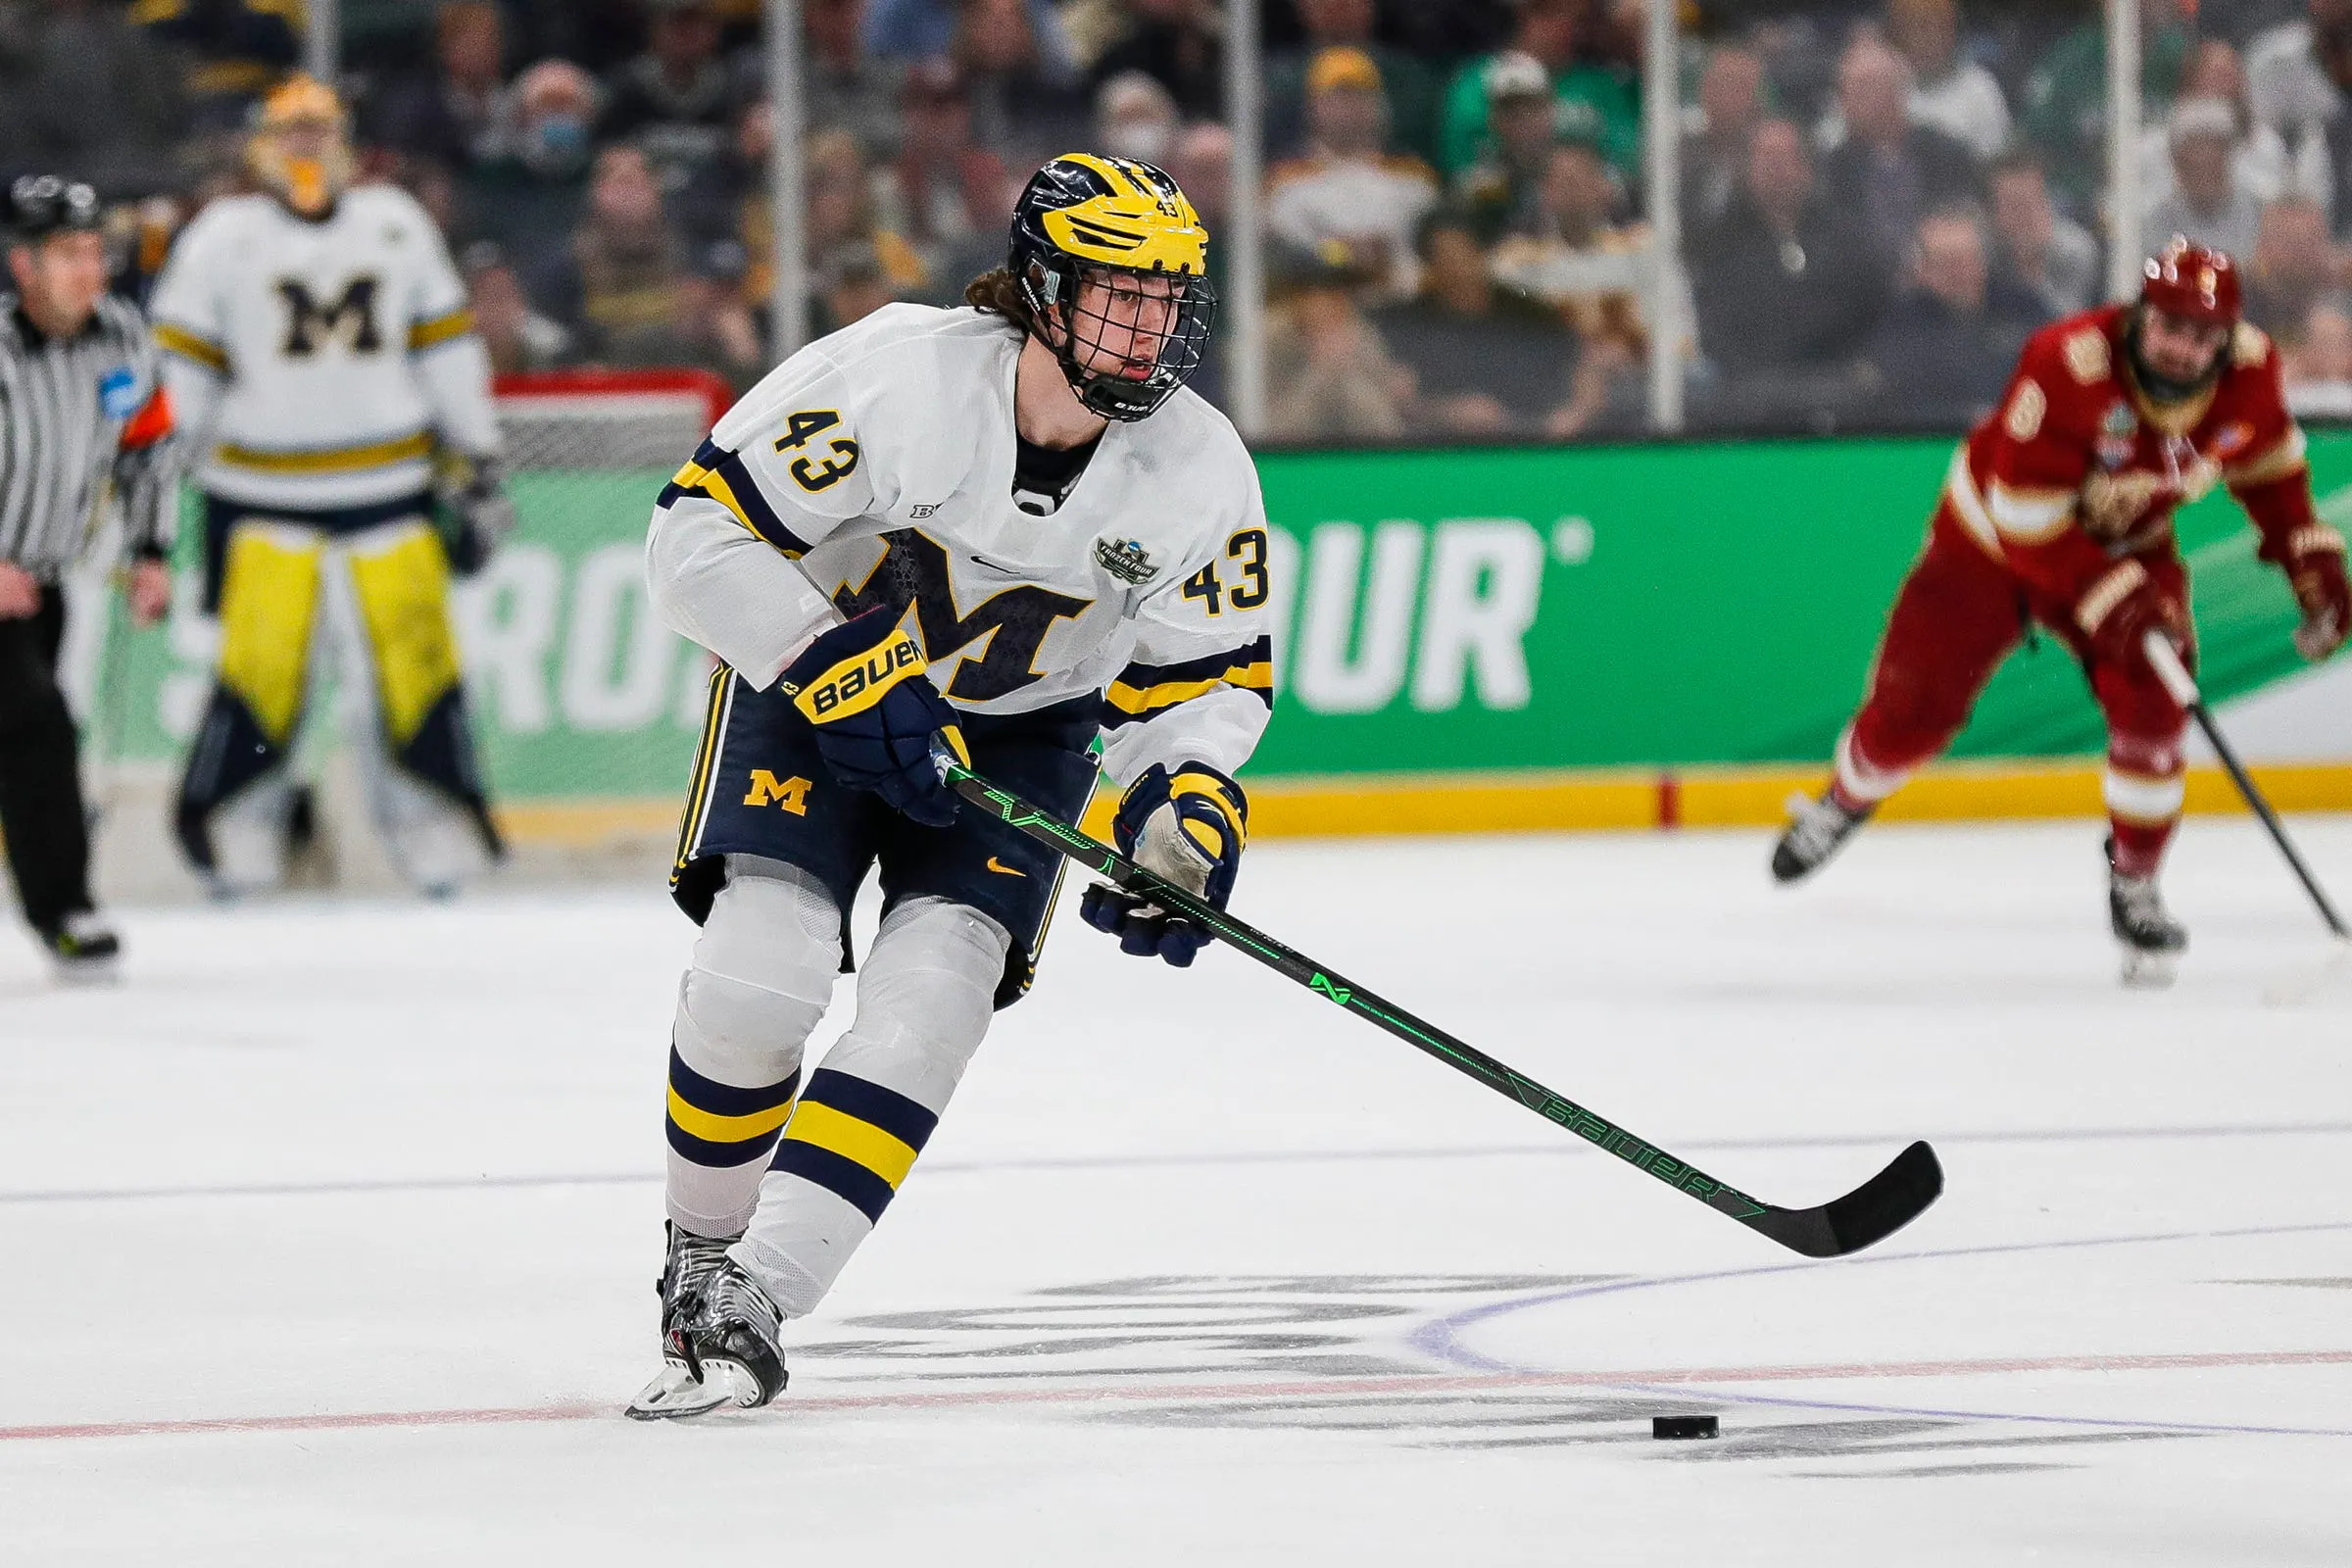 Top prospect Luke Hughes will join New Jersey Devils after NCAA season ends